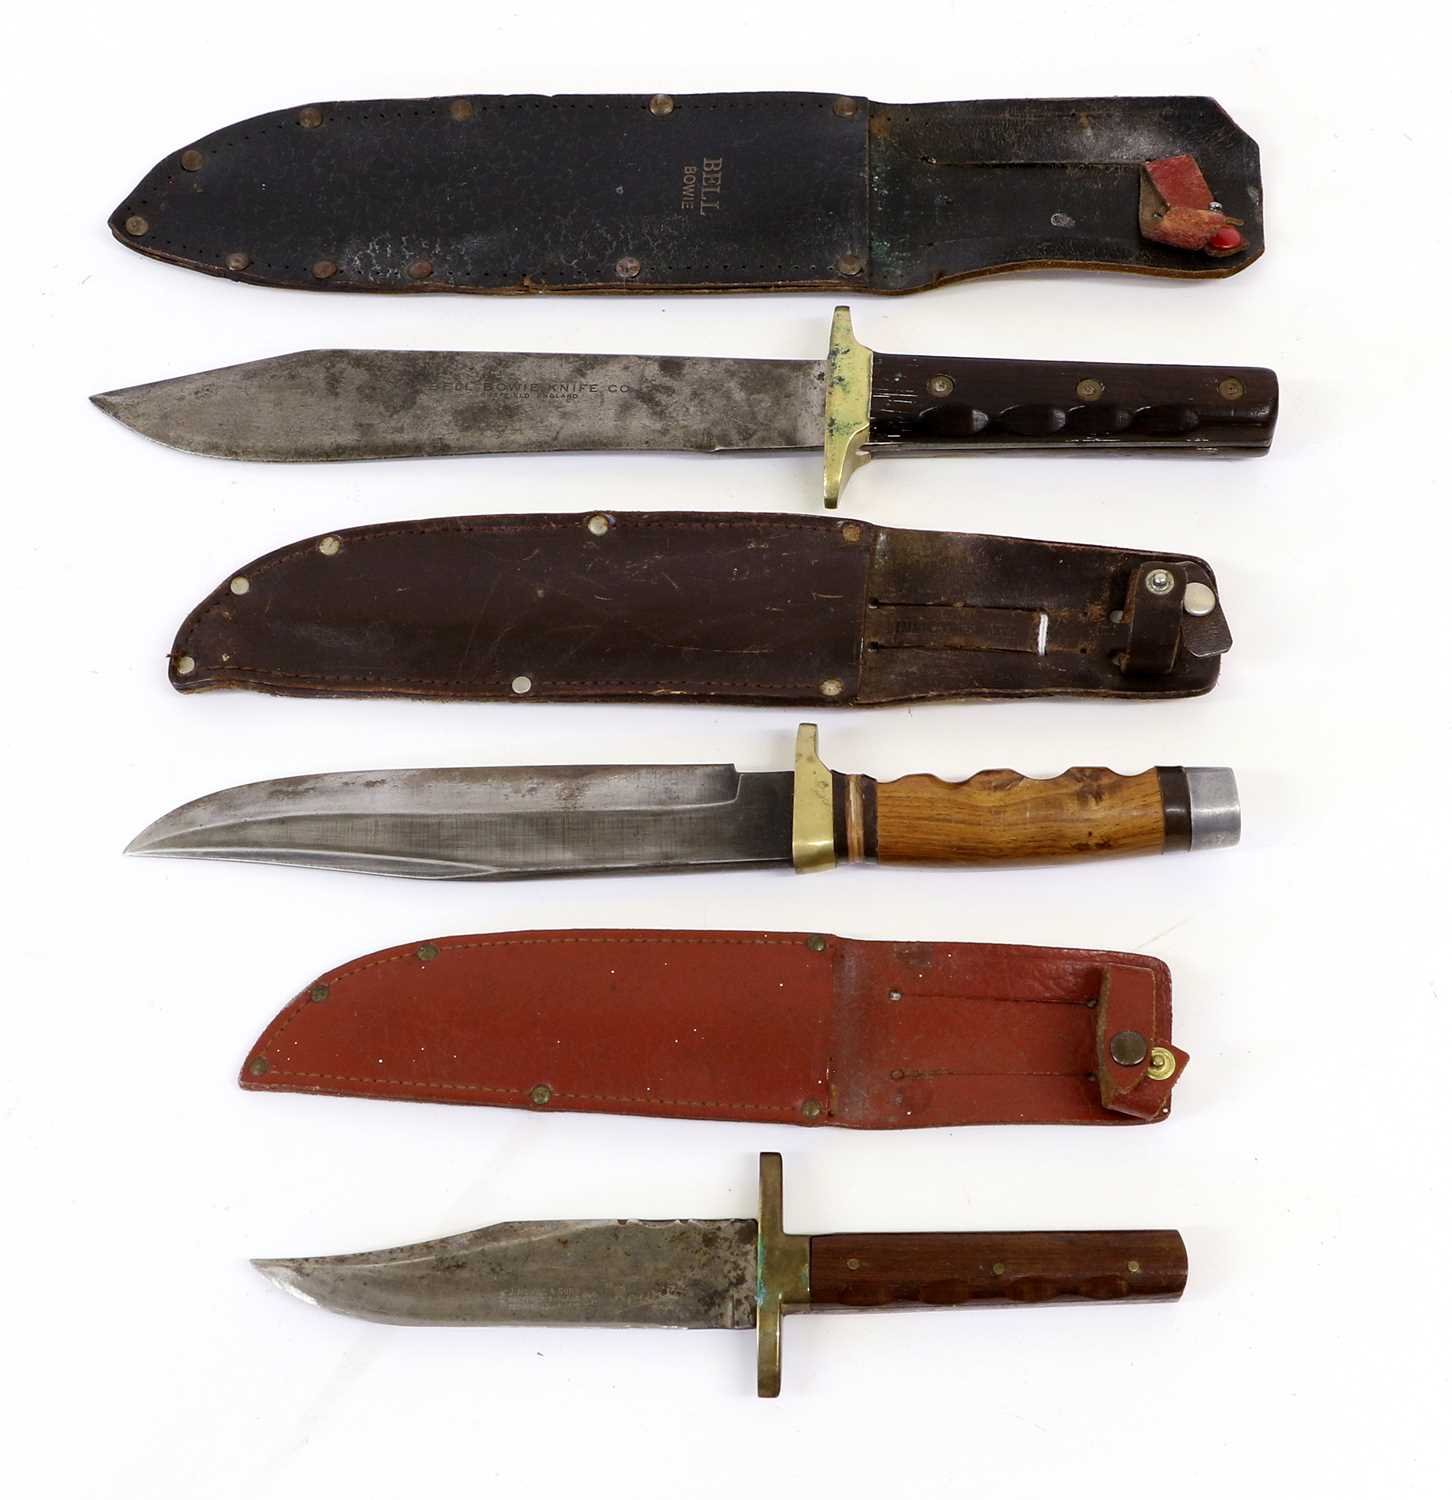 Lot 152 - A Bowie Knife by the Bell Bowie Knife Co.,...